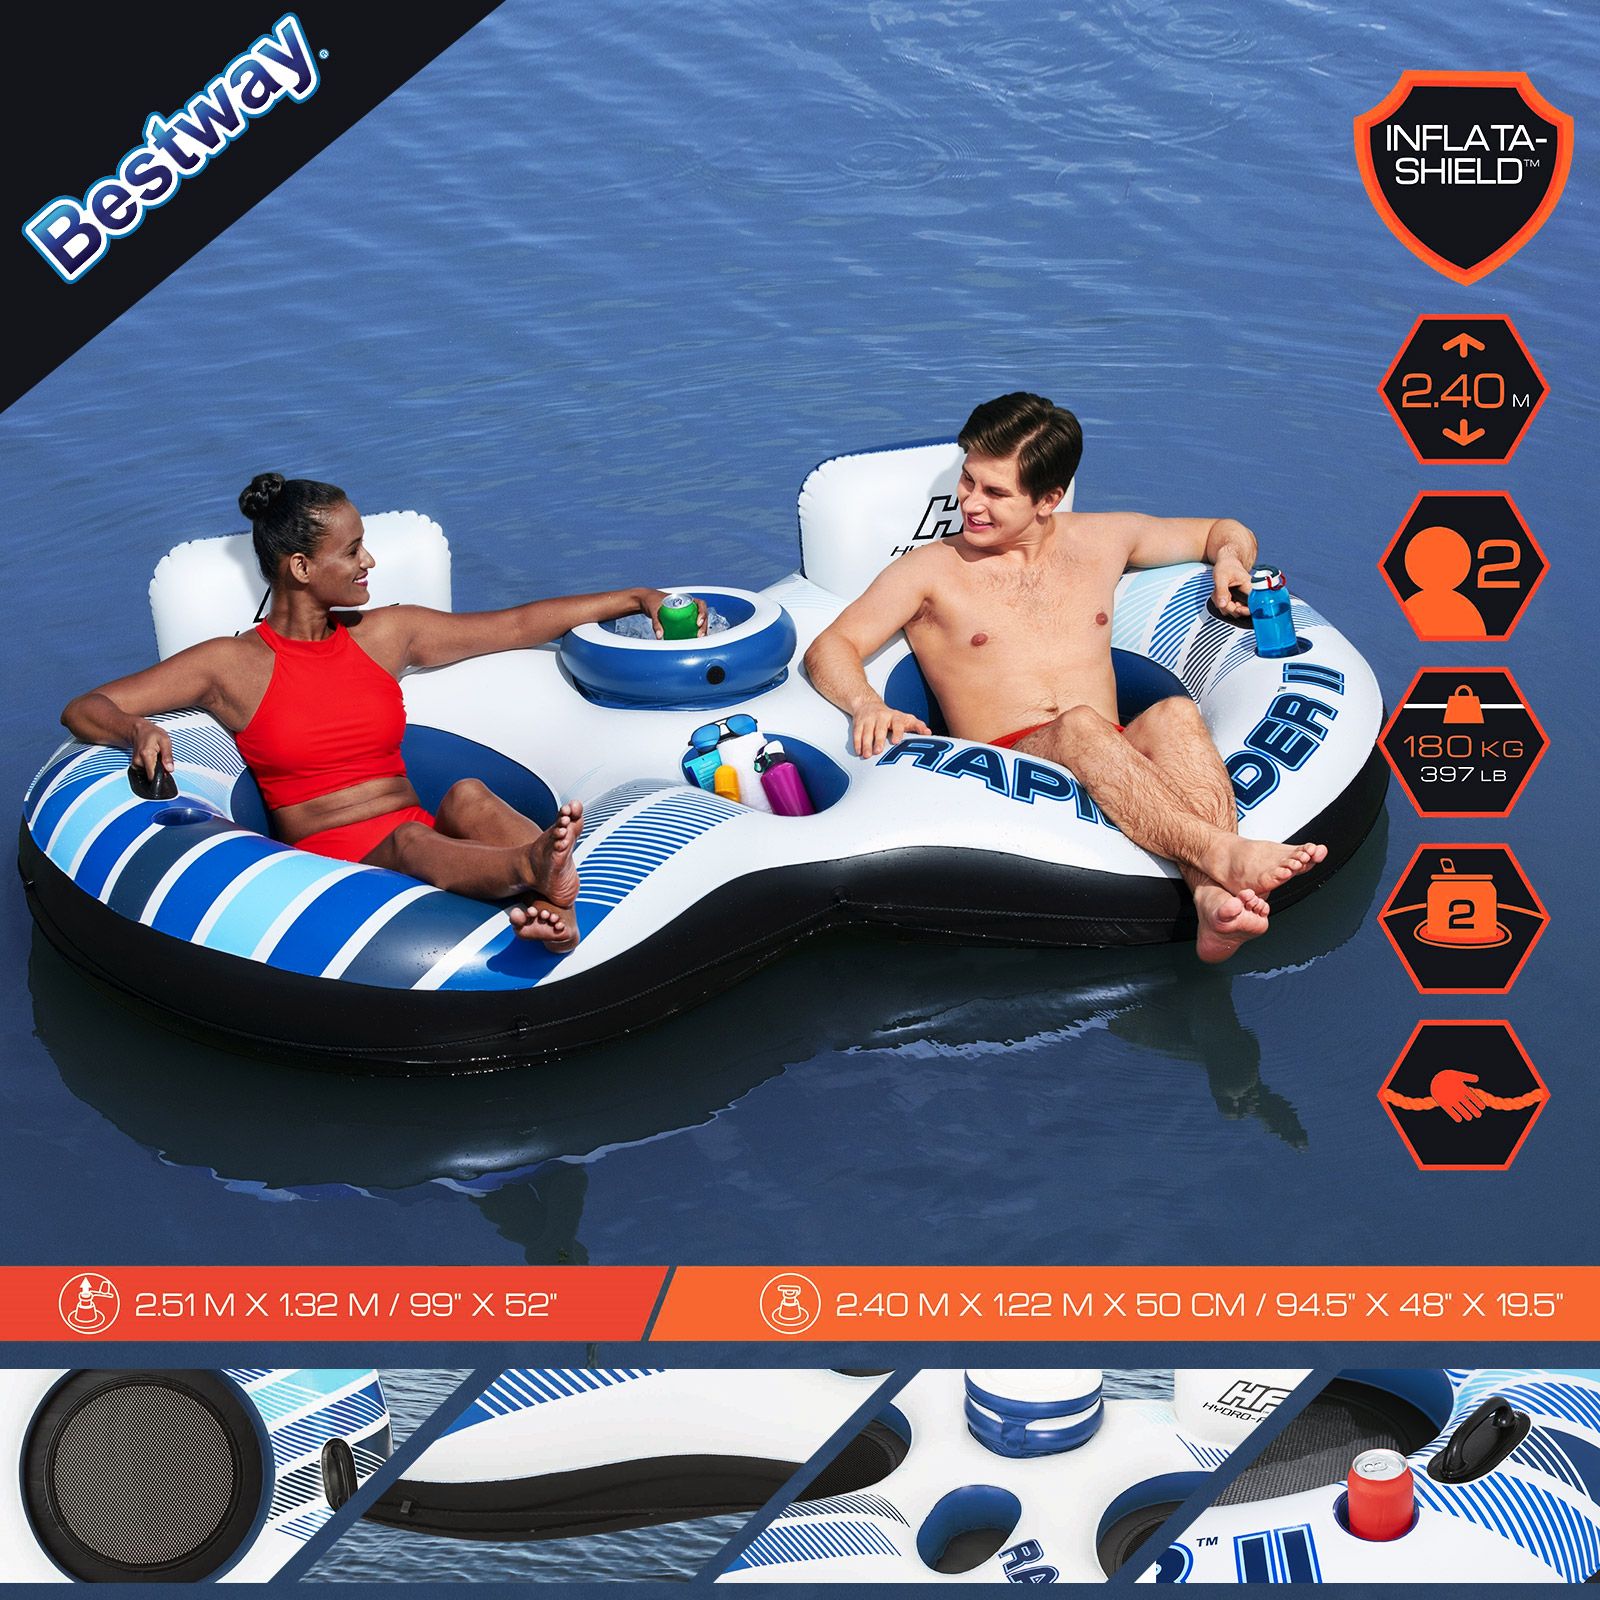 Bestway Floating Island Pool Float Tubes 2 Man River Tube Water Raft Inflatable Watersport Rapid Rider Double Innertube Lake Lounger with Cooler